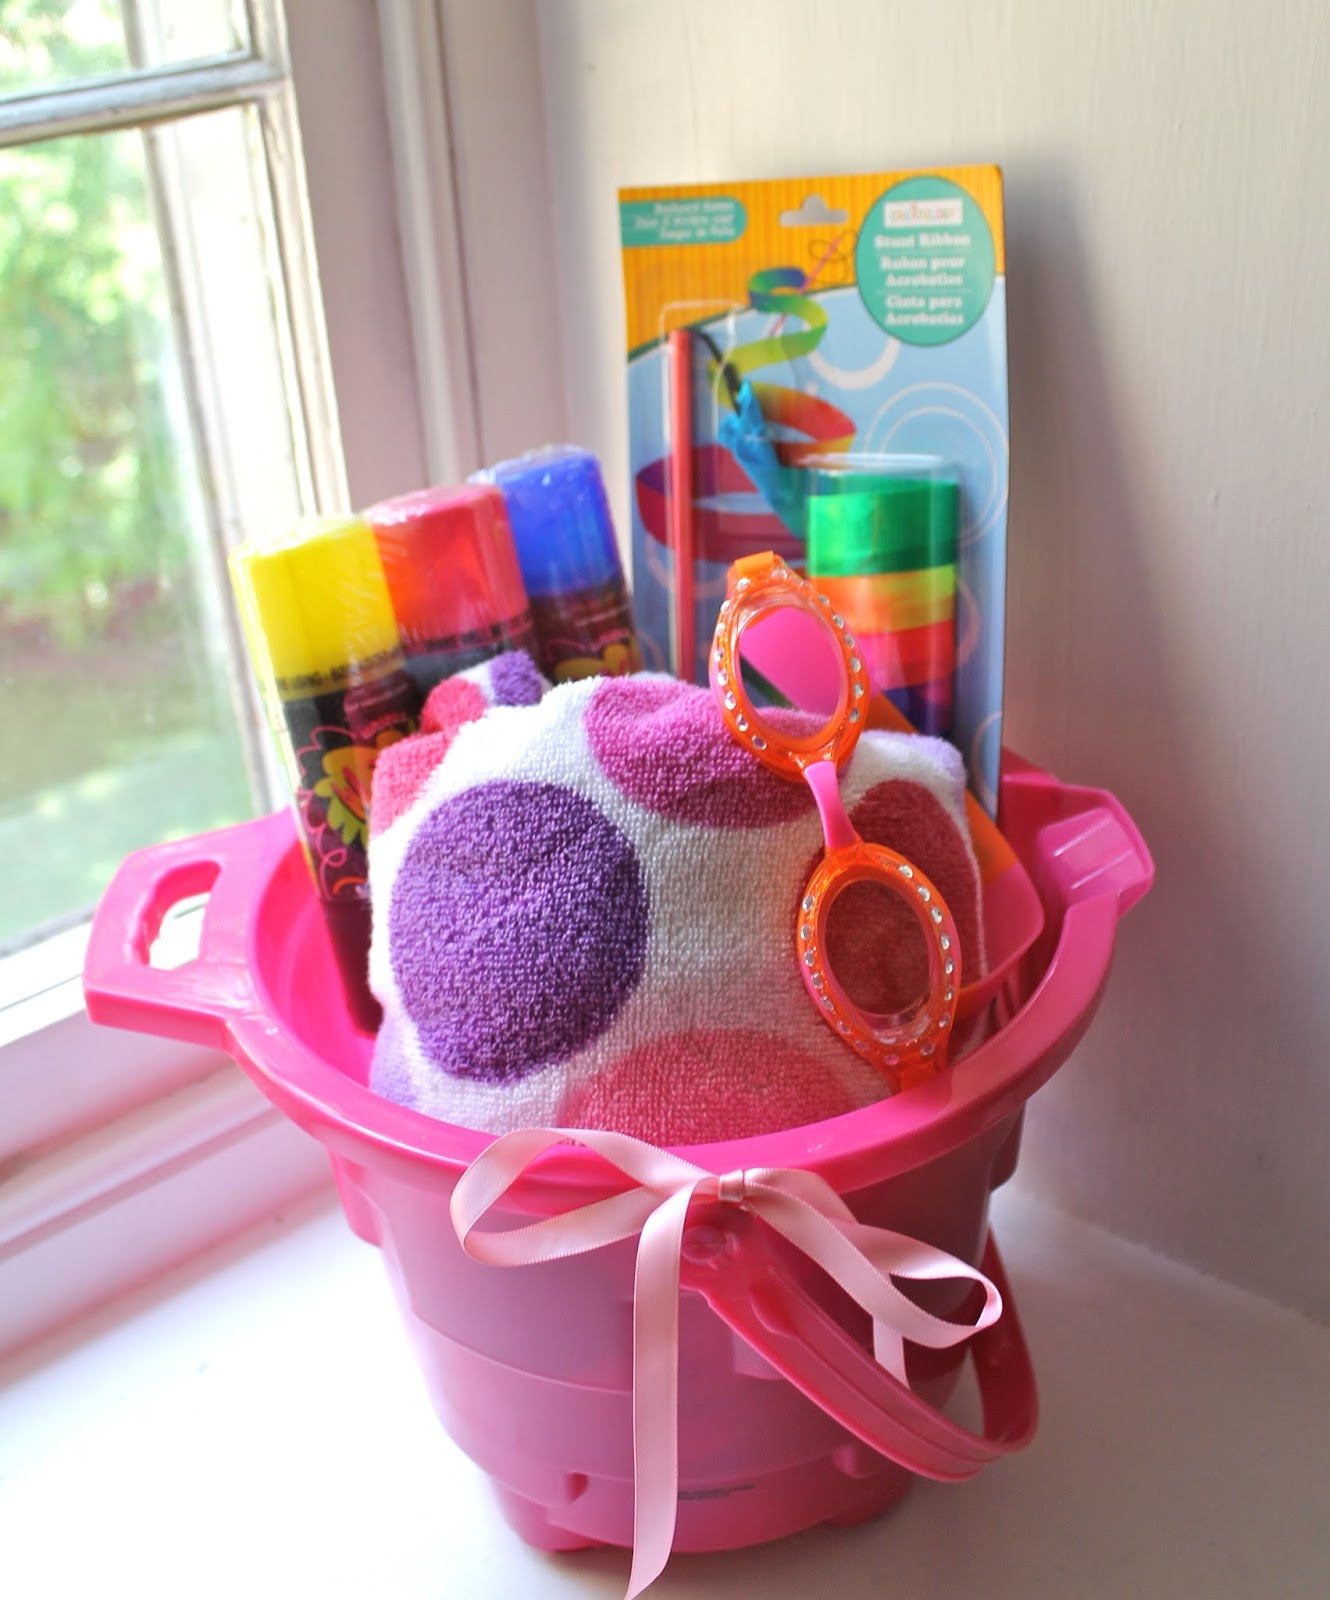 Gift Basket Ideas For Kids
 Pretti Mini Blog Wel e Summer with an End of School